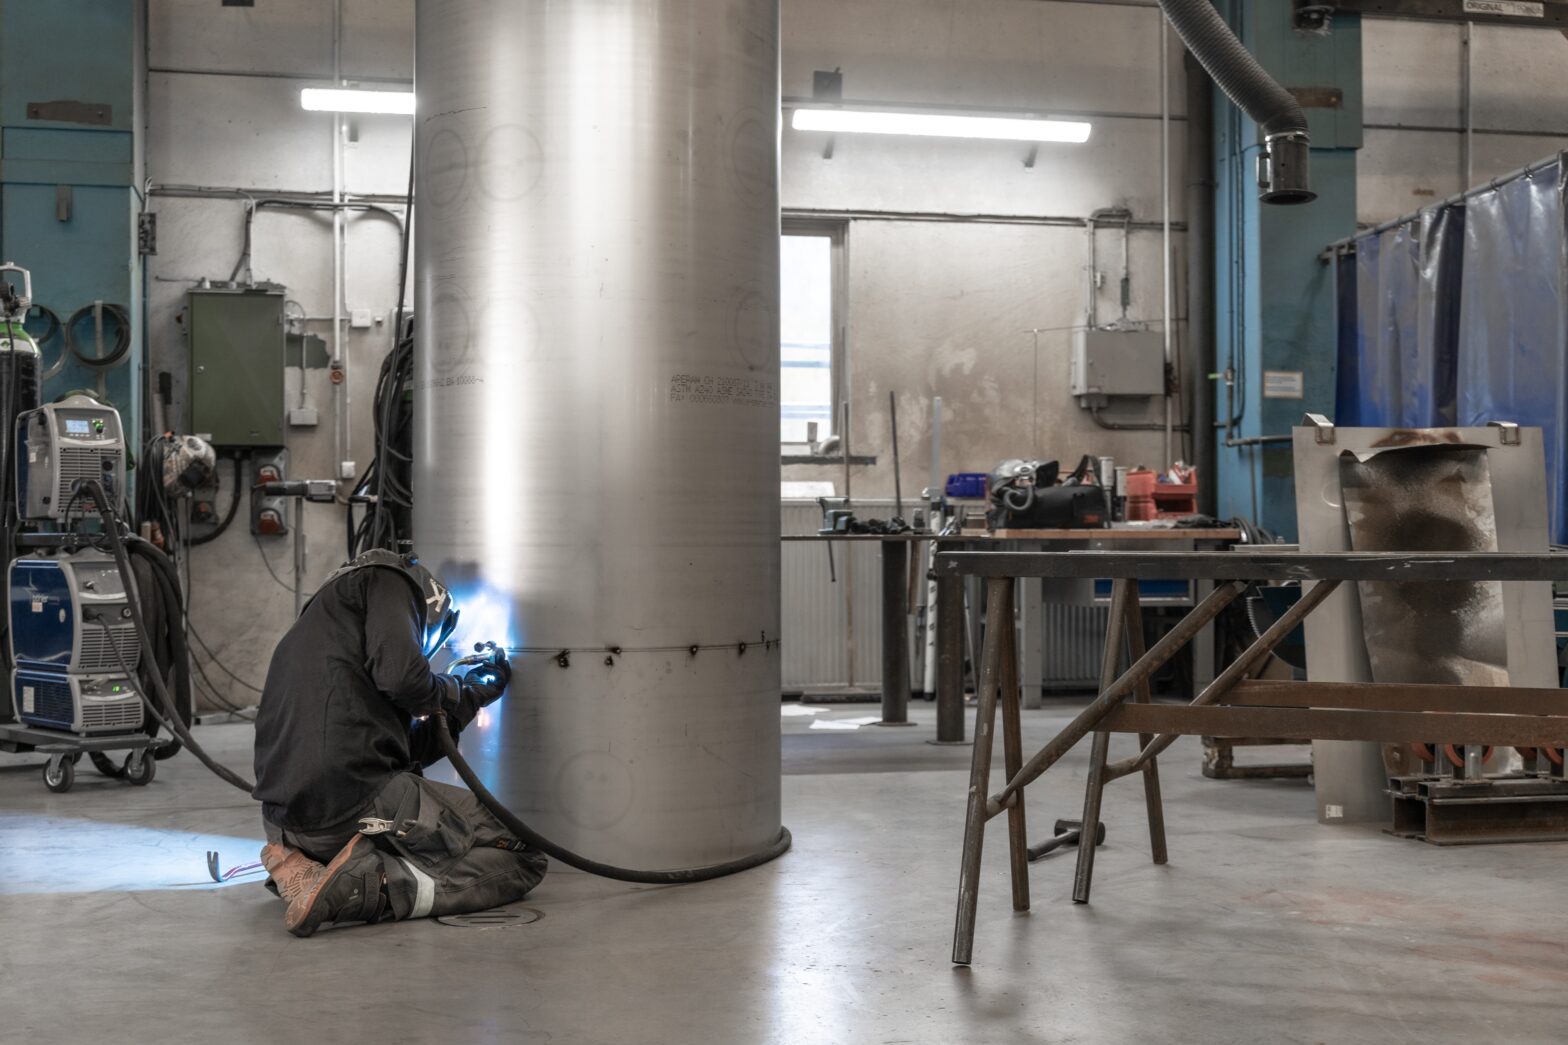 An image of a workshop, with a person welding on a floor to ceiling length aluminium cylinder